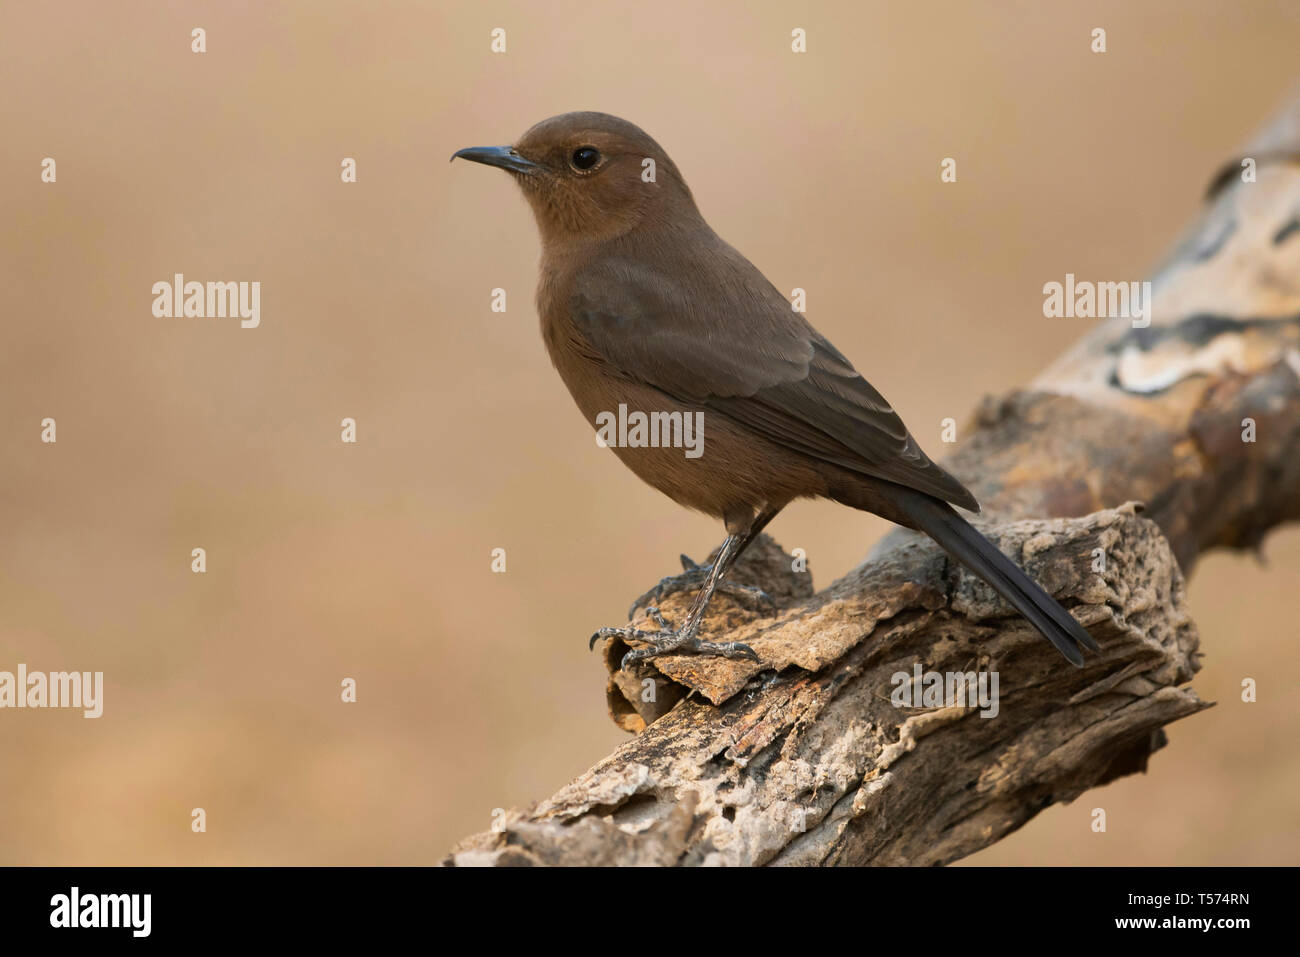 Roccia marrone o in chat chat indiano, Oenanthe fusca, Tal Chhapar Santuario, Rajasthan, India. Foto Stock